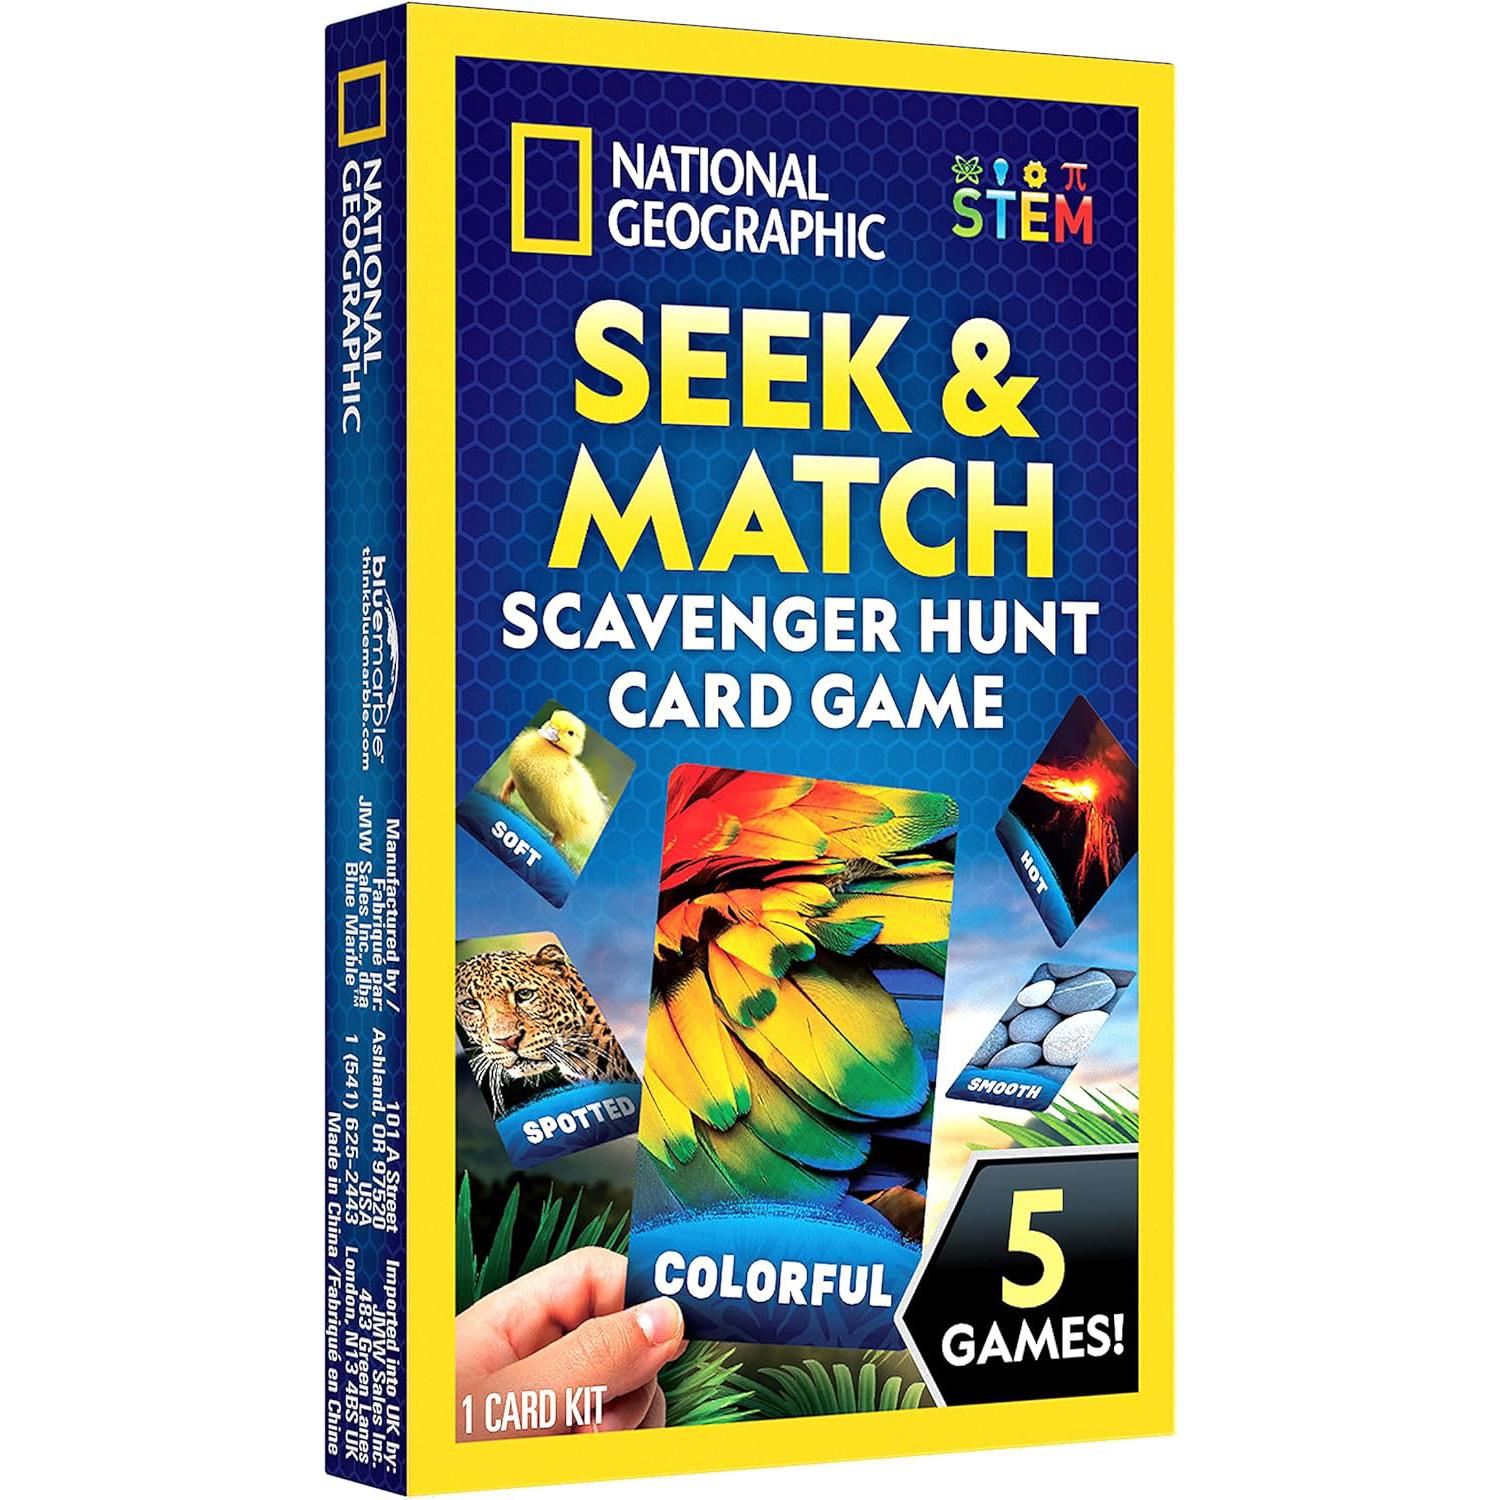 National Geographic Scavenger Hunt for Kids Card Game for $4.99